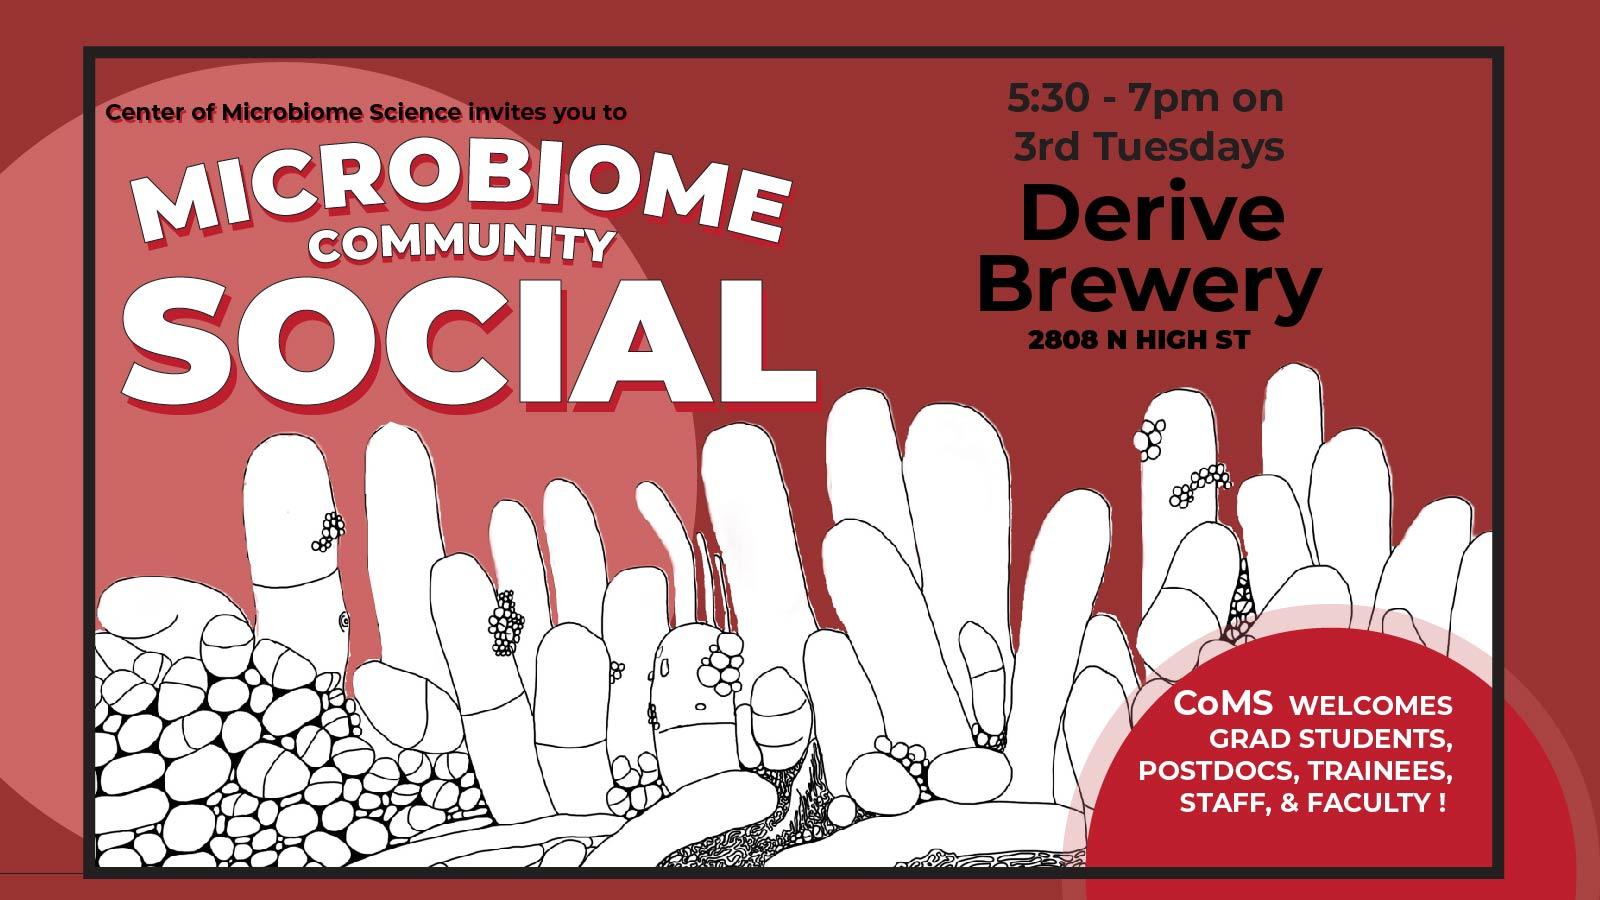 Microbiome Community Social 11.21.23 Derive Brewery 5:30 - 7pm